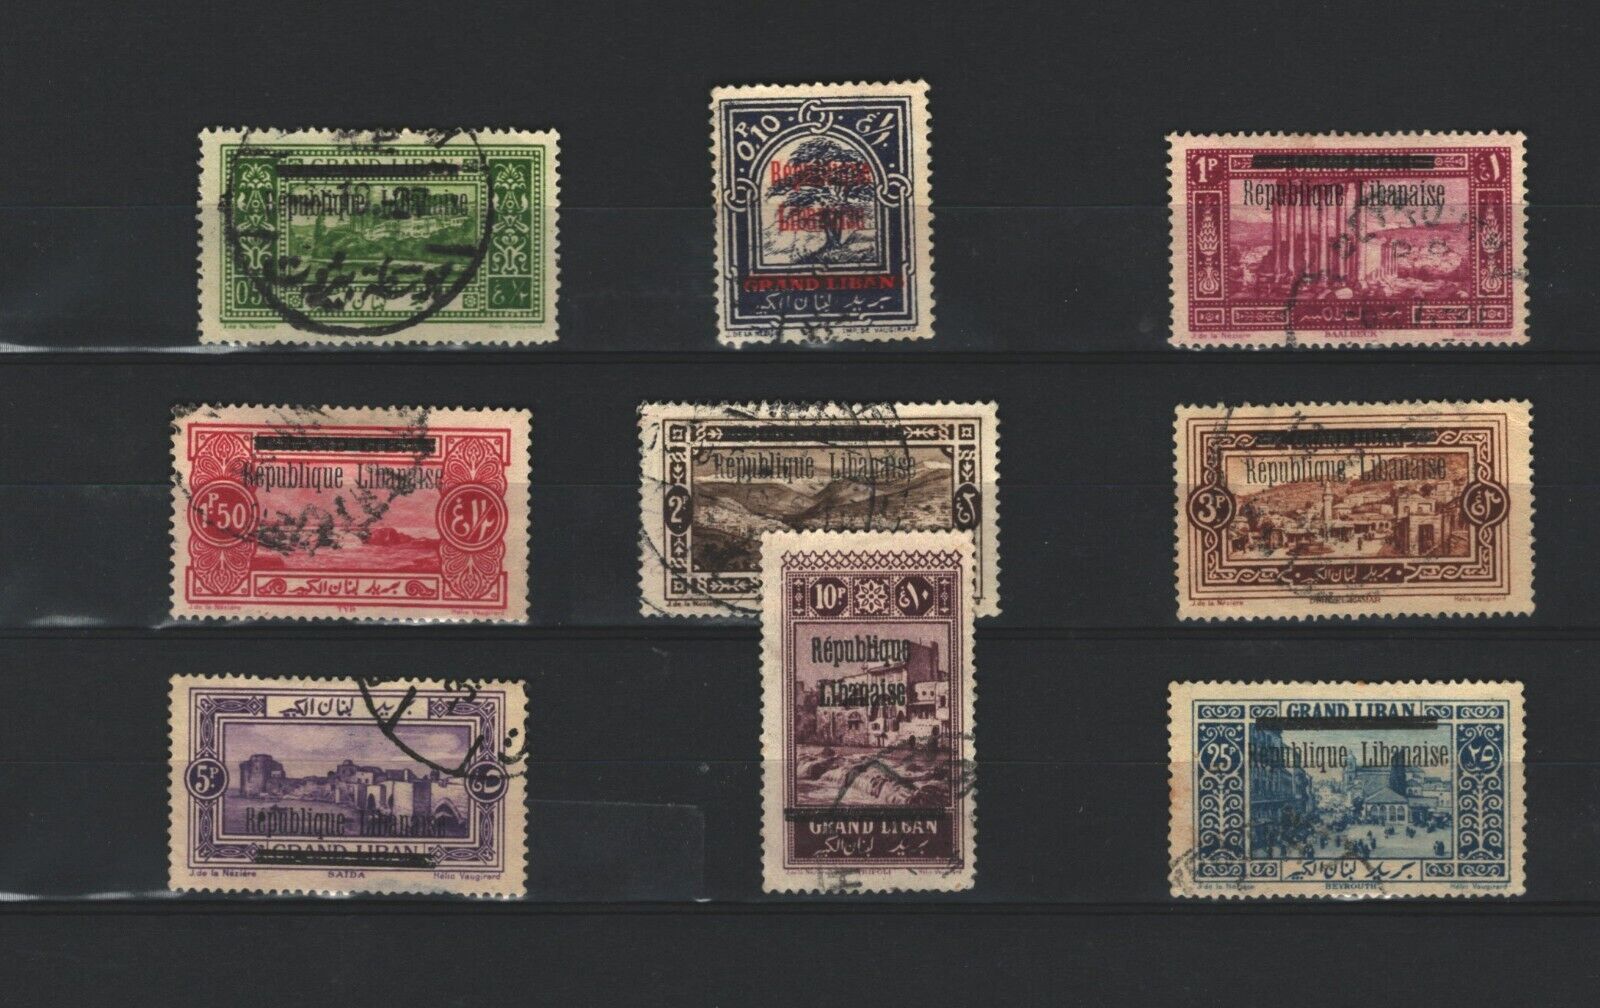 Liban  French colonies Postal USED Set of  Overprinted STAMPS LOT ( Leb 61) Без бренда